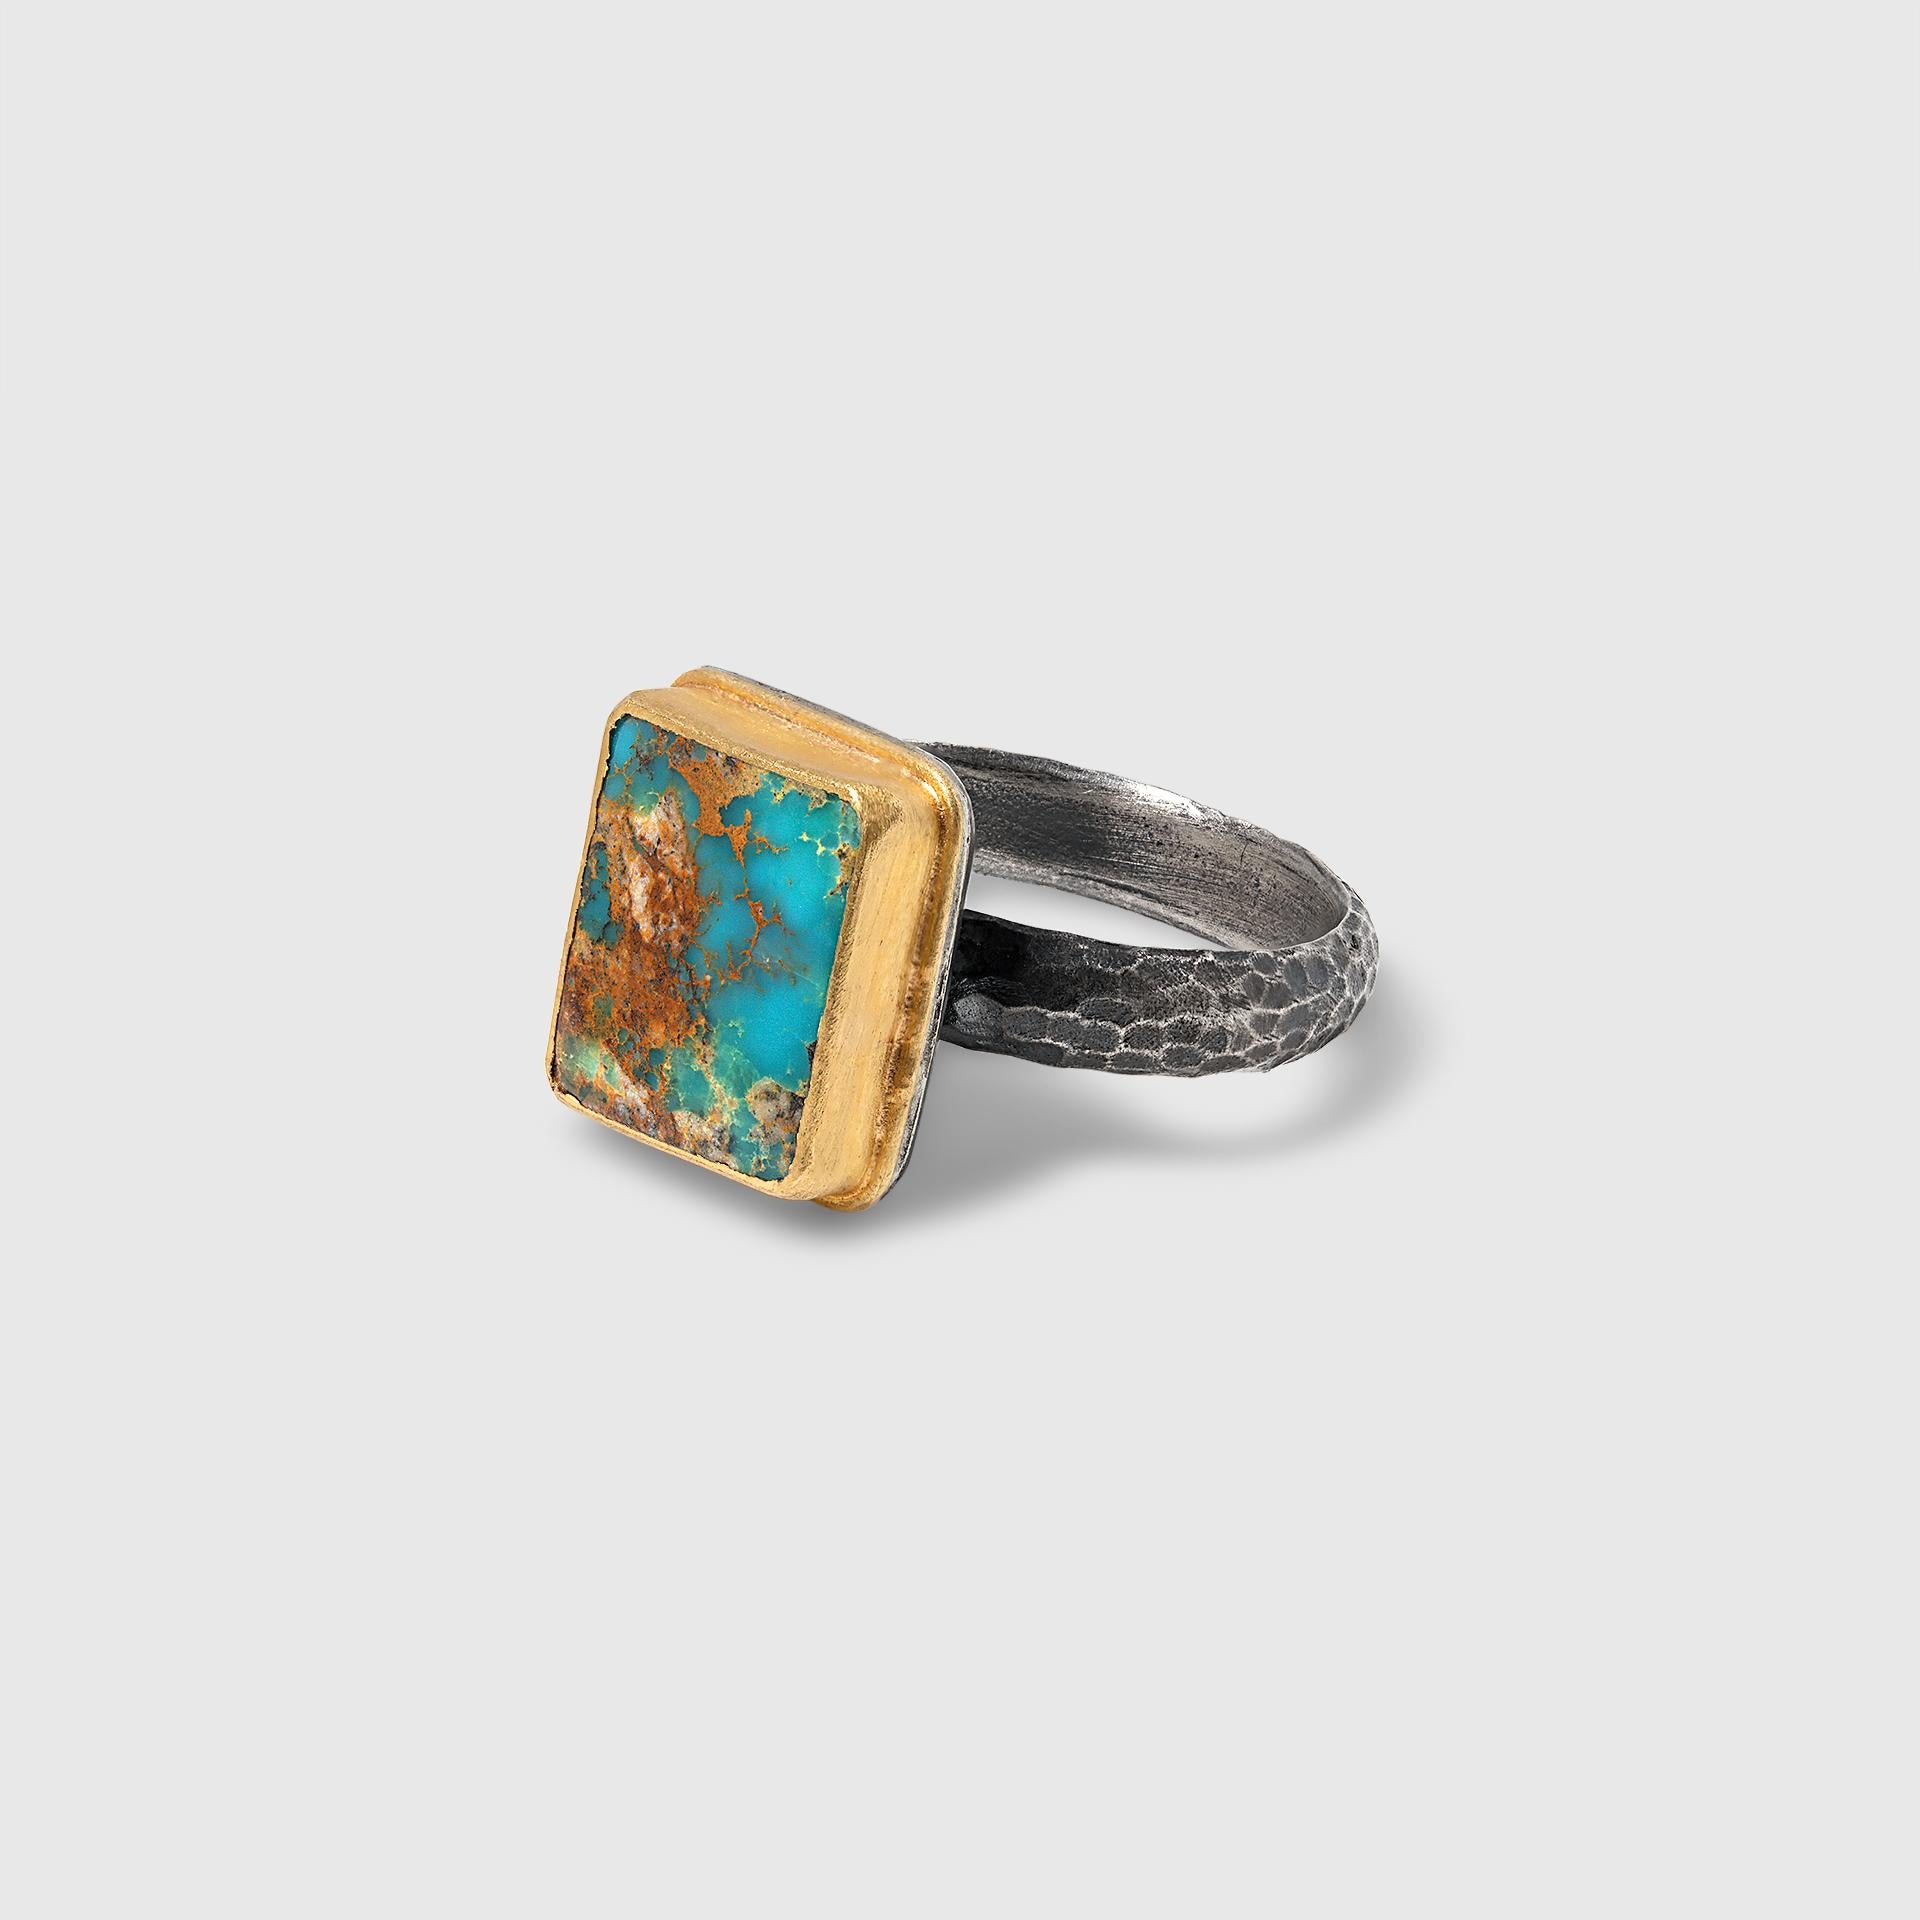 5 Carat Organic Turquoise Brown Teal Green Rectangular Ring 24K Gold & Sterling, Handmade by Prehistoric Works of Istanbul, Turkey, elk & HAMMER Gallery

24K Yellow gold - G995, 1.30 grams
Sterling silver, S925 - 4.00 grams
Turquoise - 5.00 ct
Size